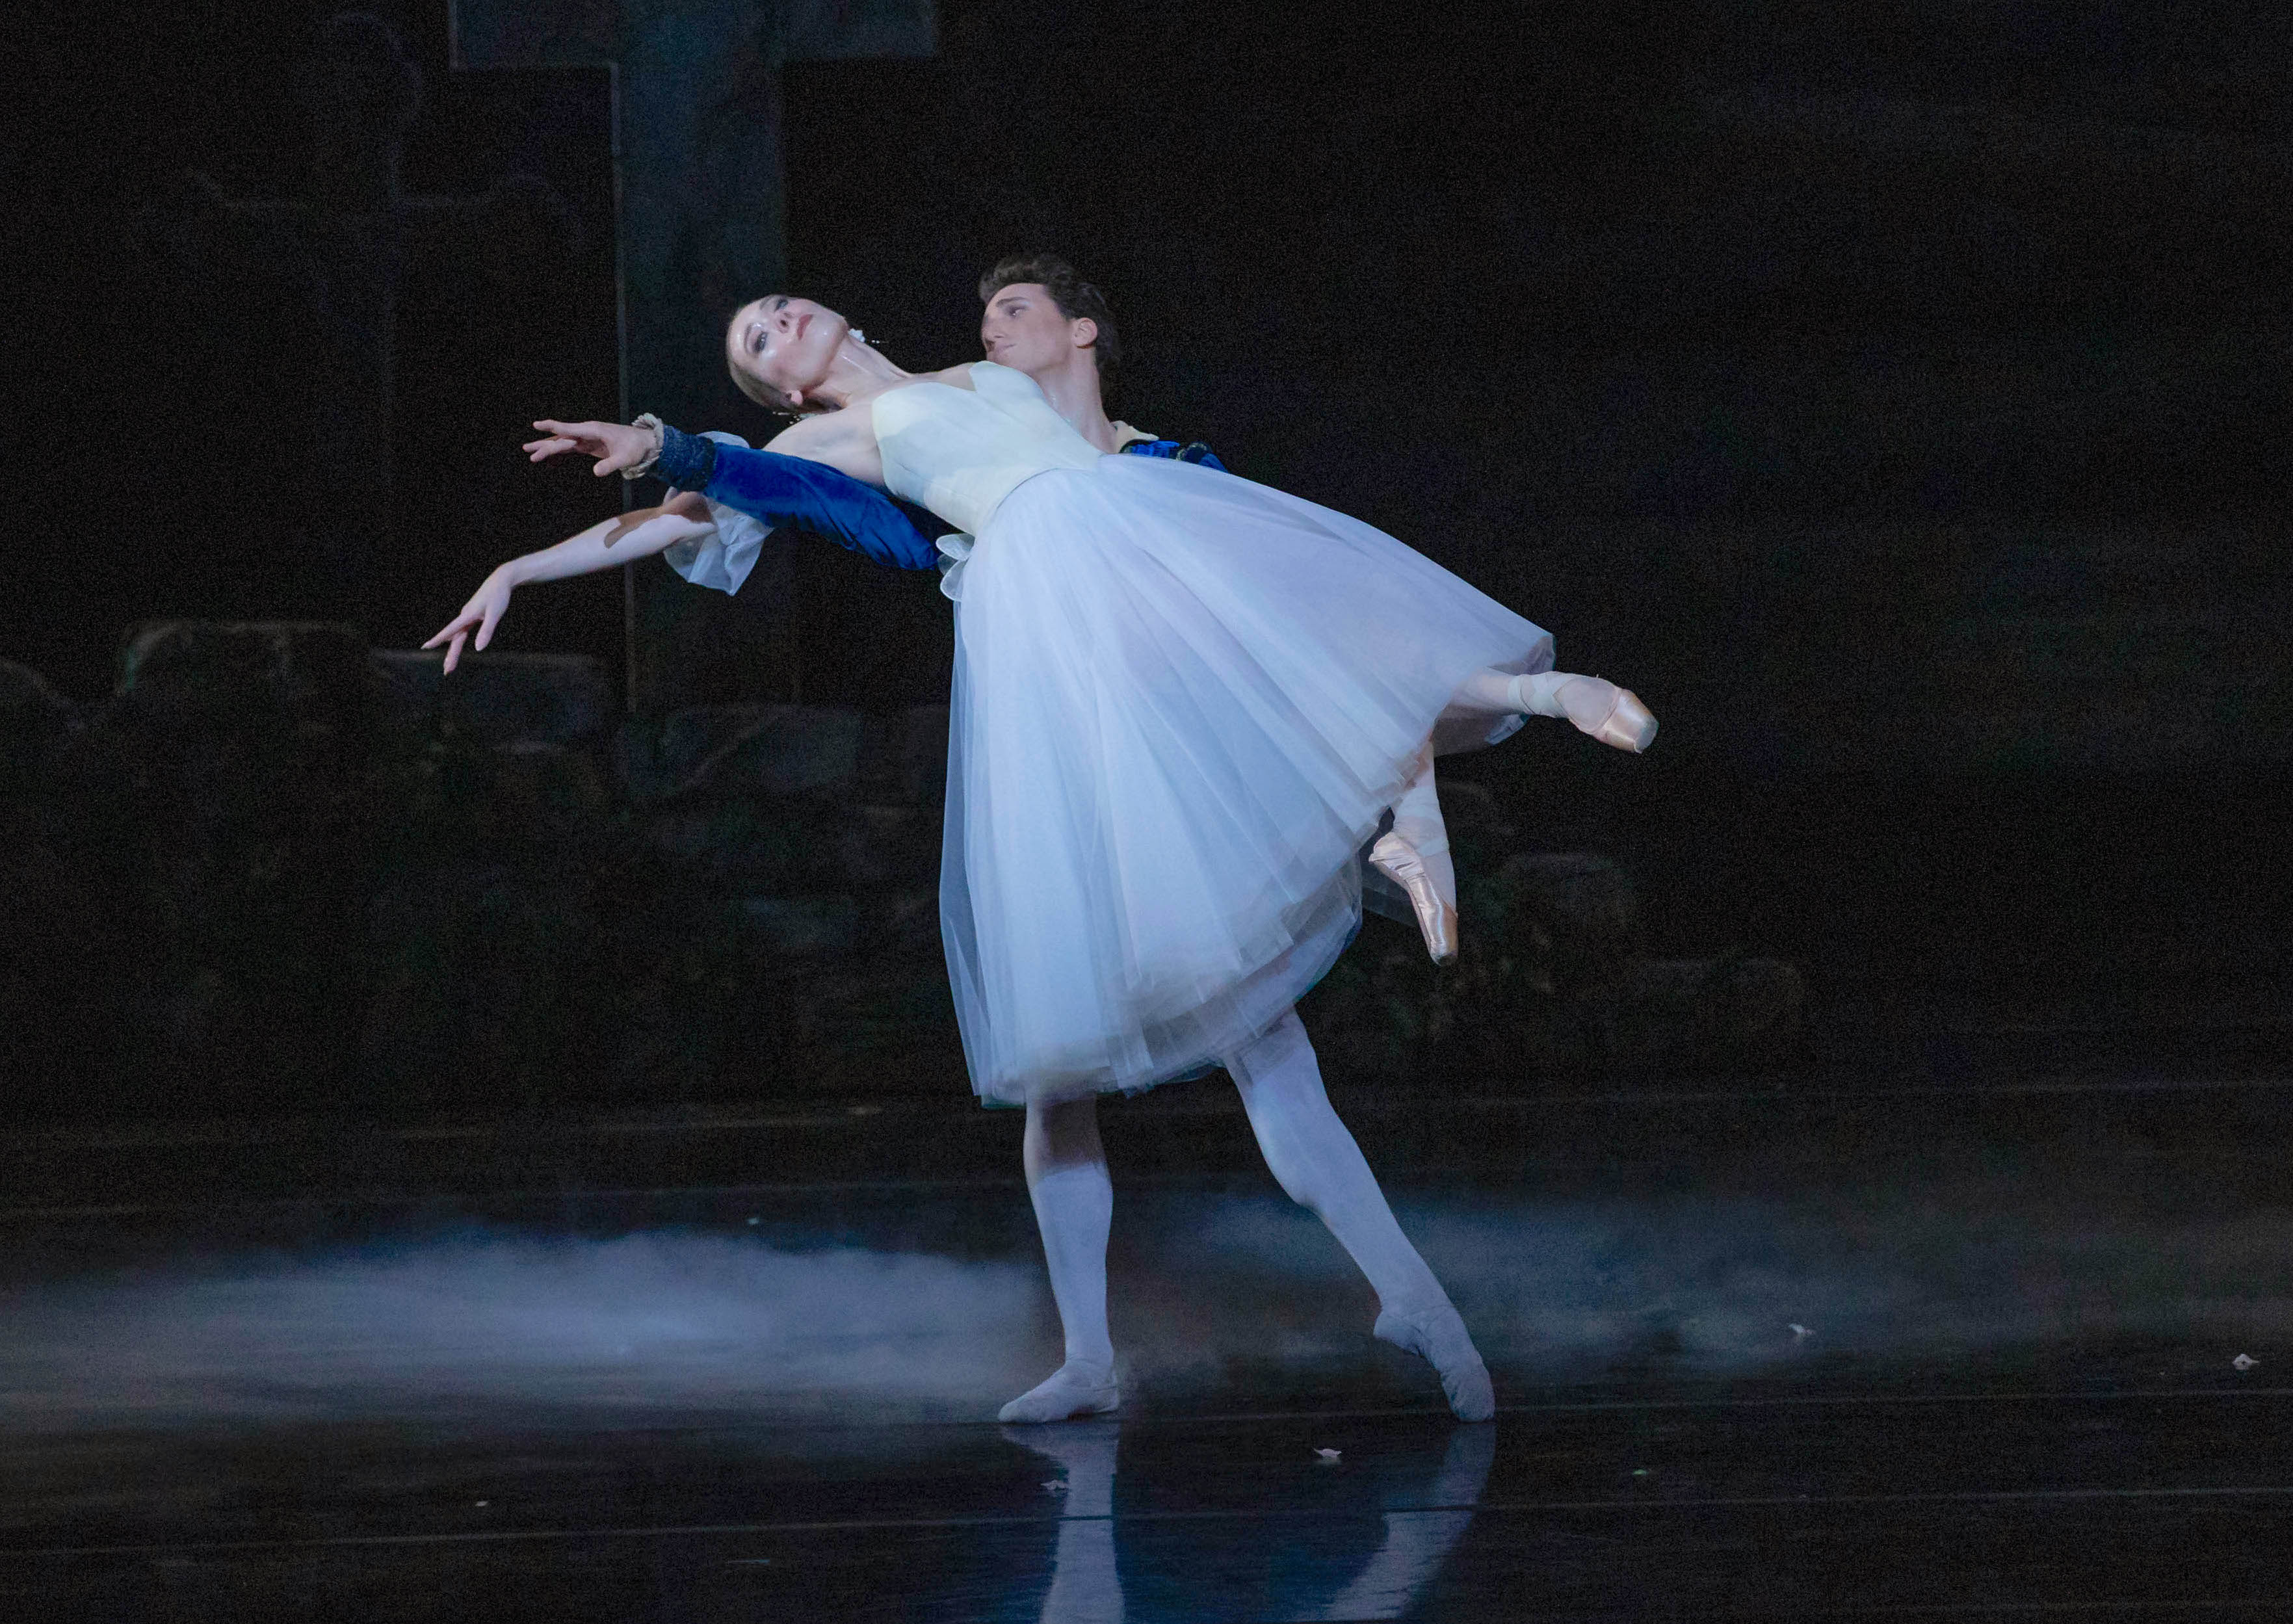 REVIEW: Ballet’s revival of 19th-century classic shows solid professionalism